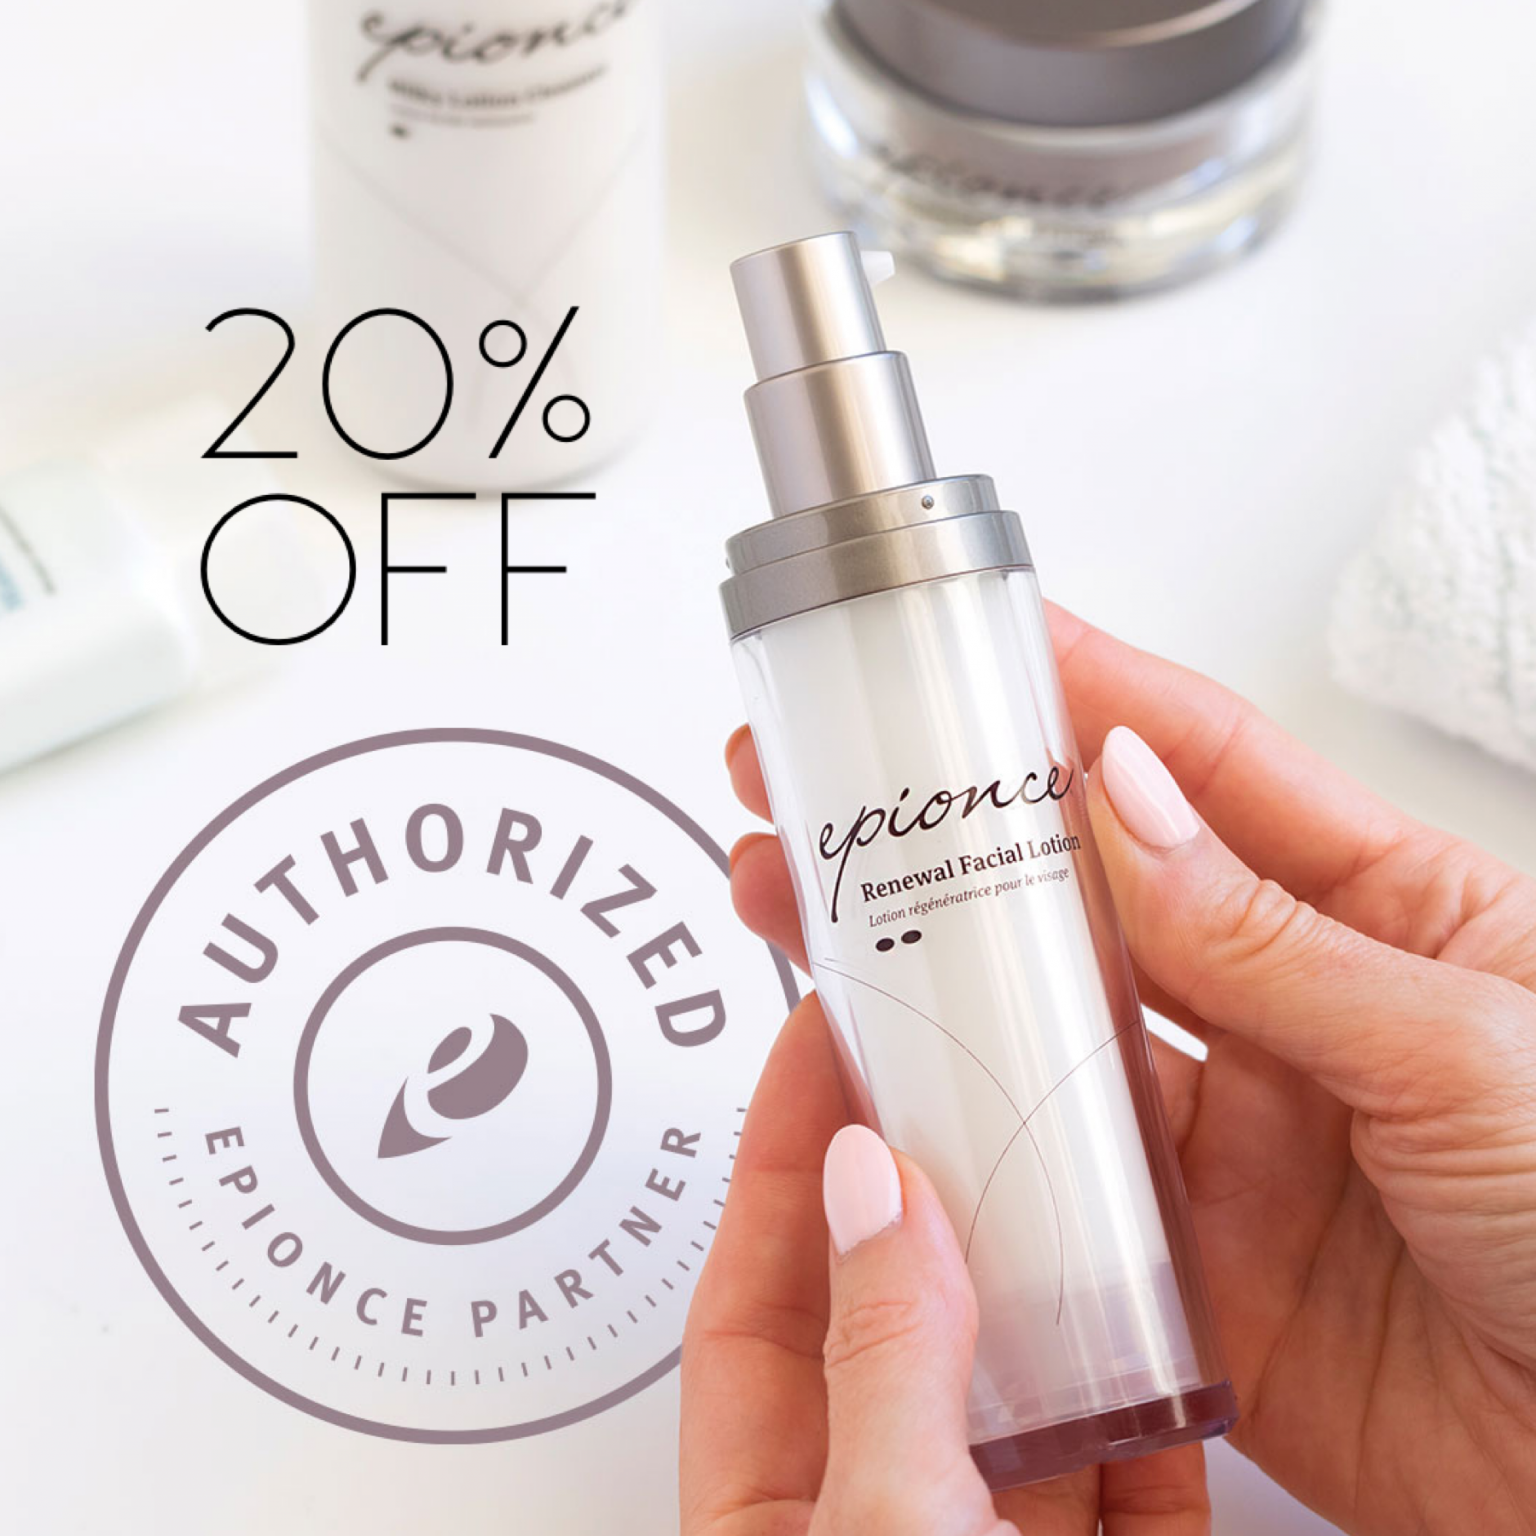 epionce 20% off - Aesthetic Surgical Arts